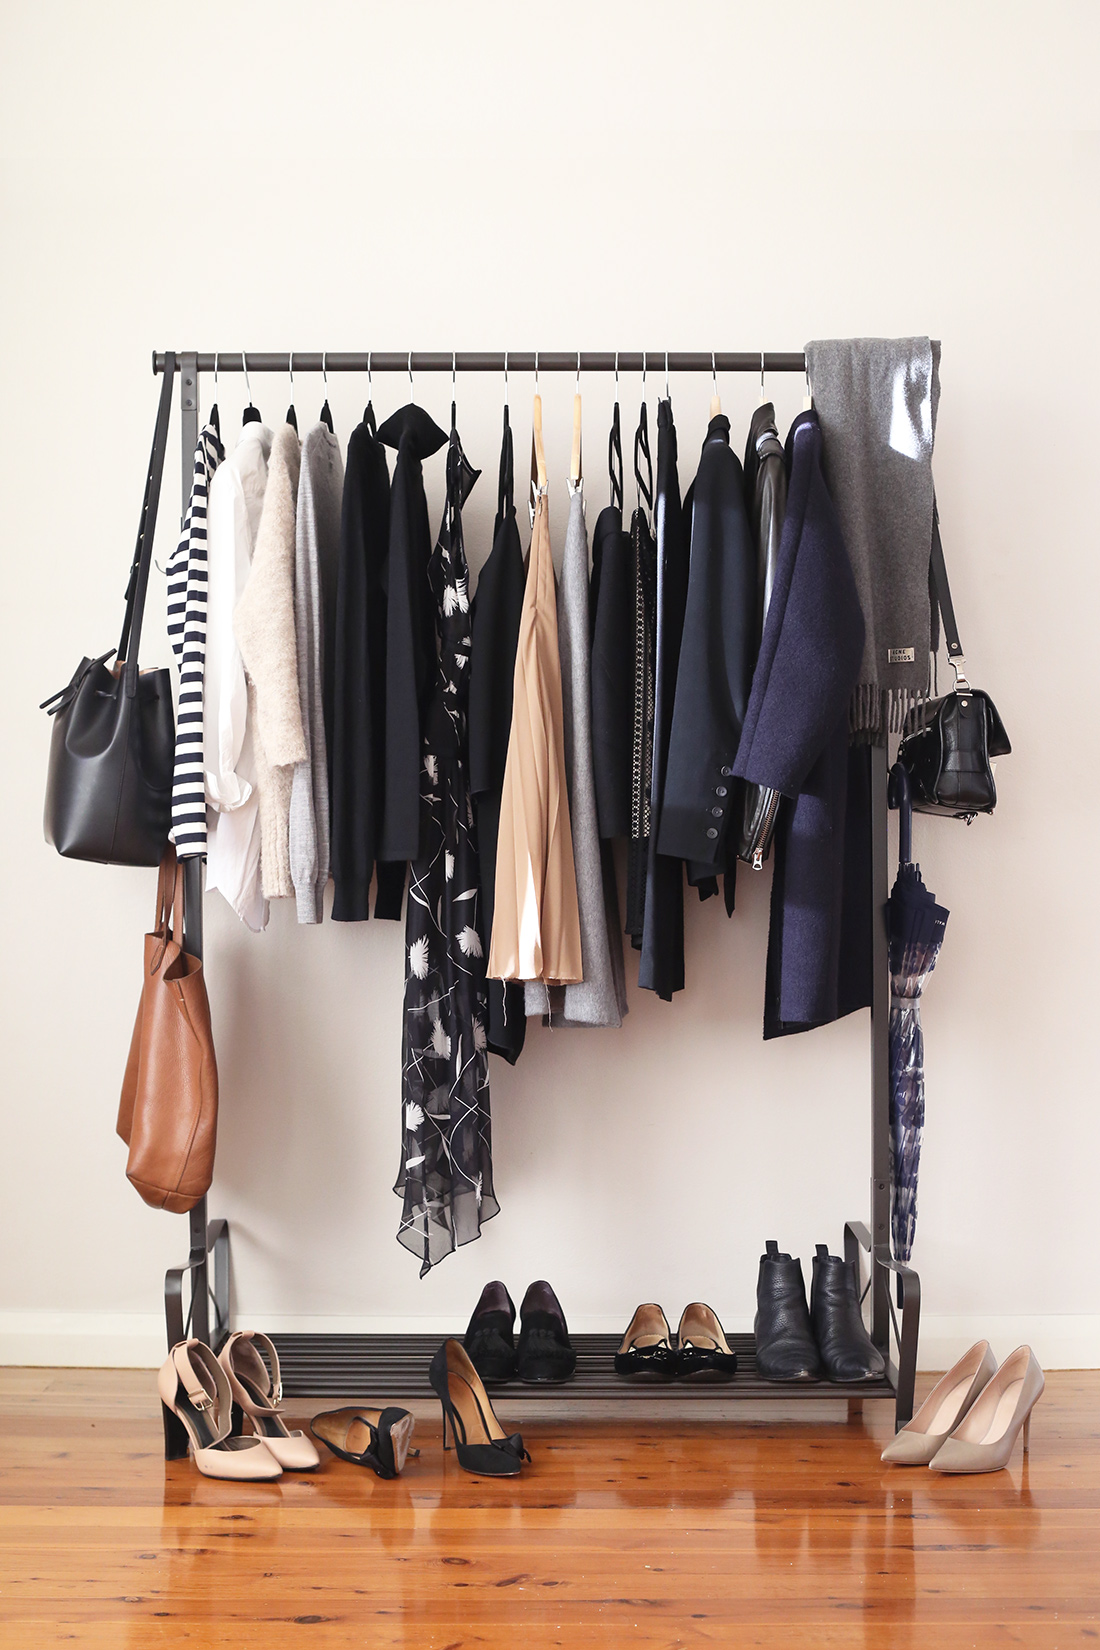 The relaxed winter capsule wardrobe